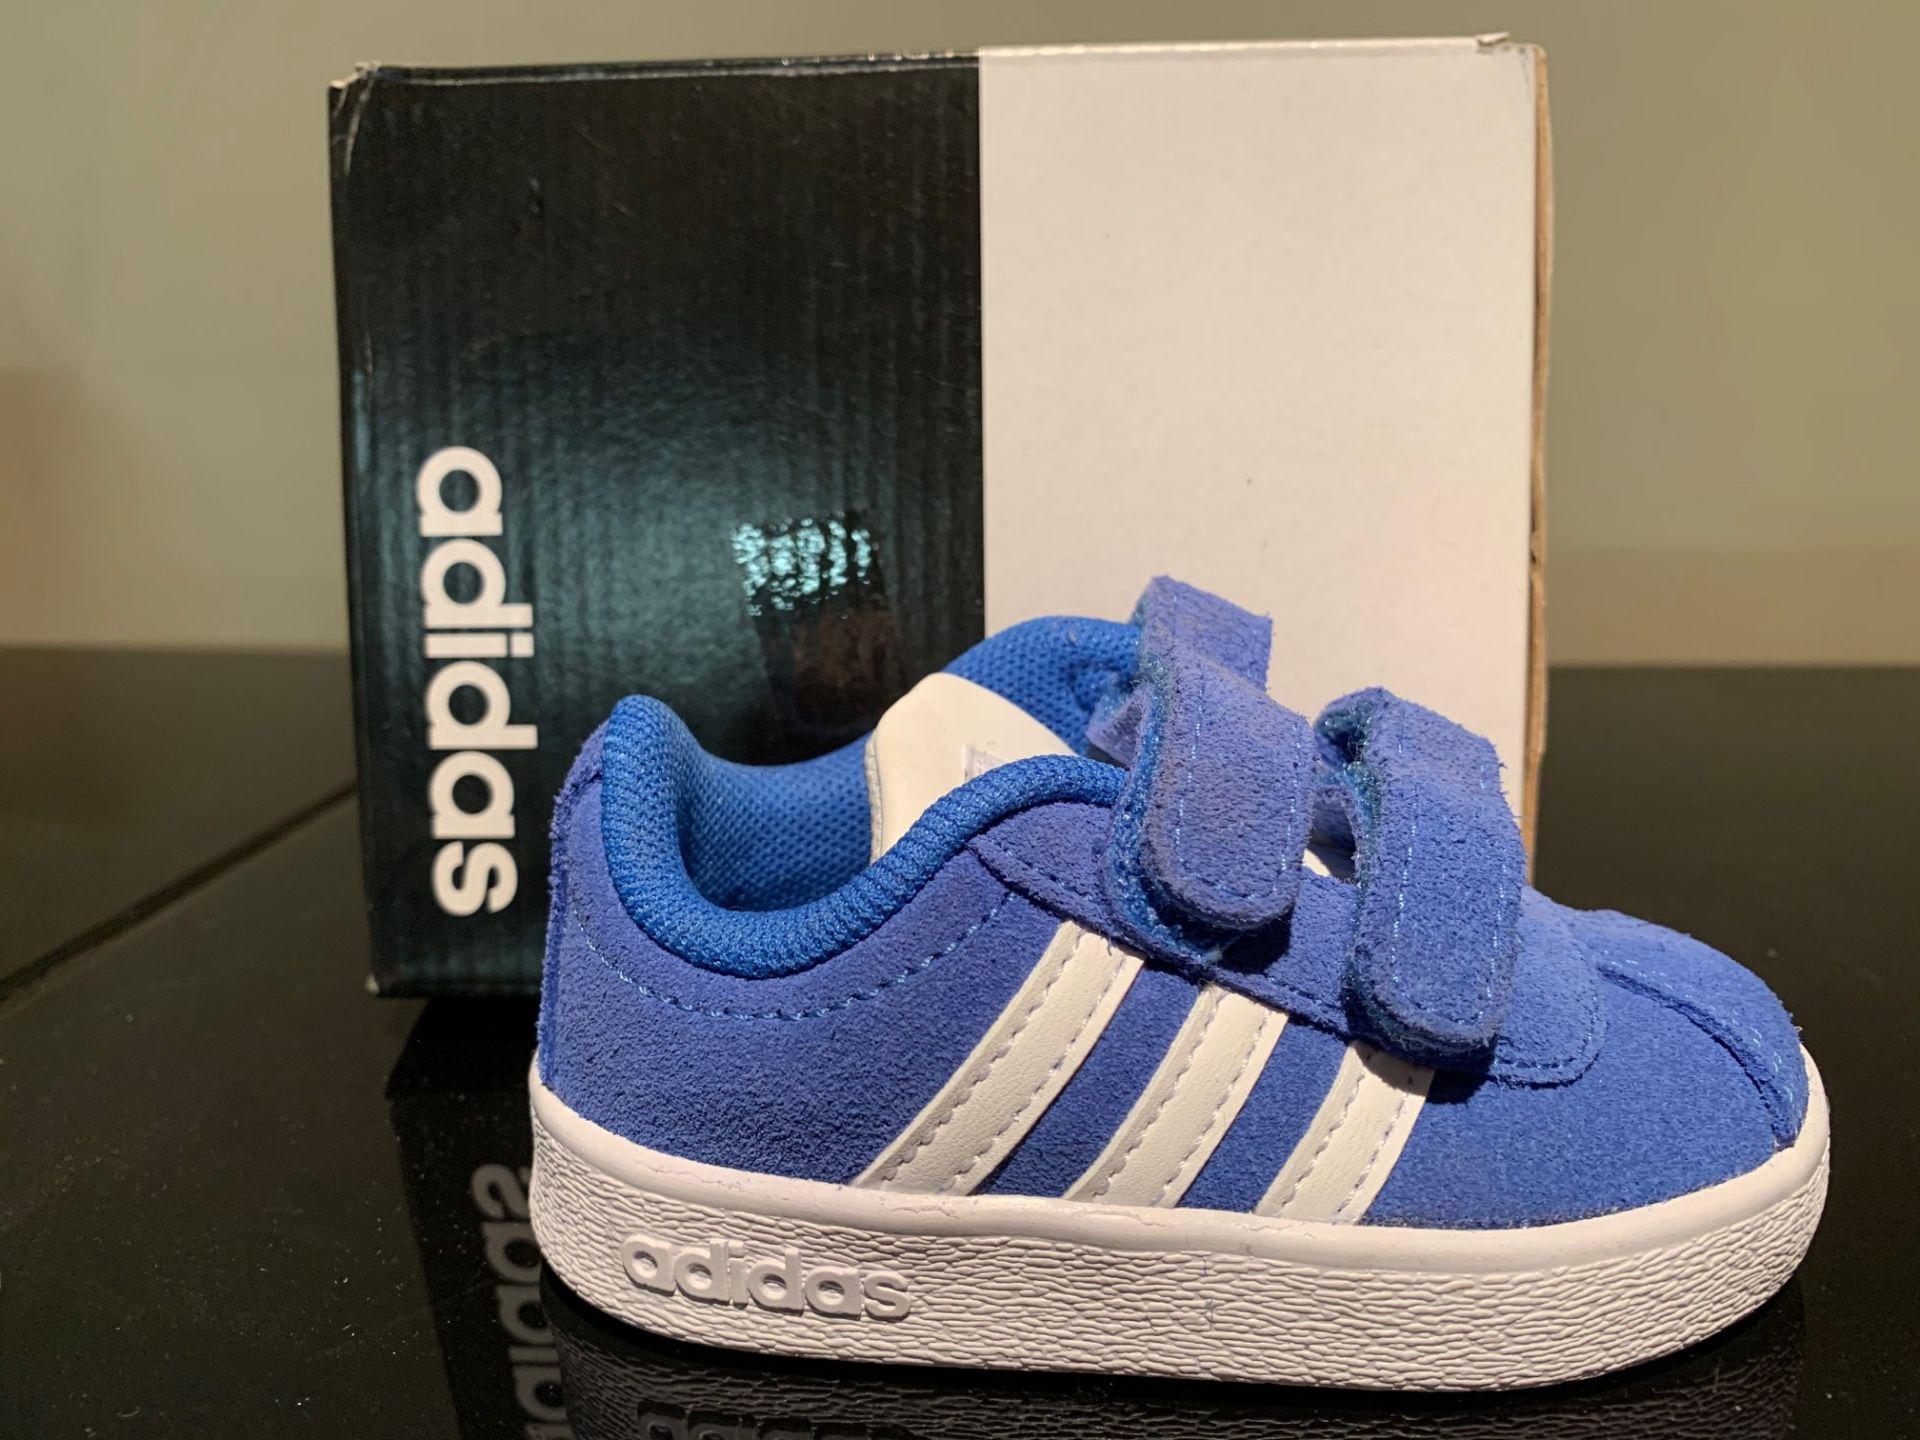 NEW & BOXED ADIDAS TRAINERS SIZE INFANT 3 (272 UPSTAIRS)